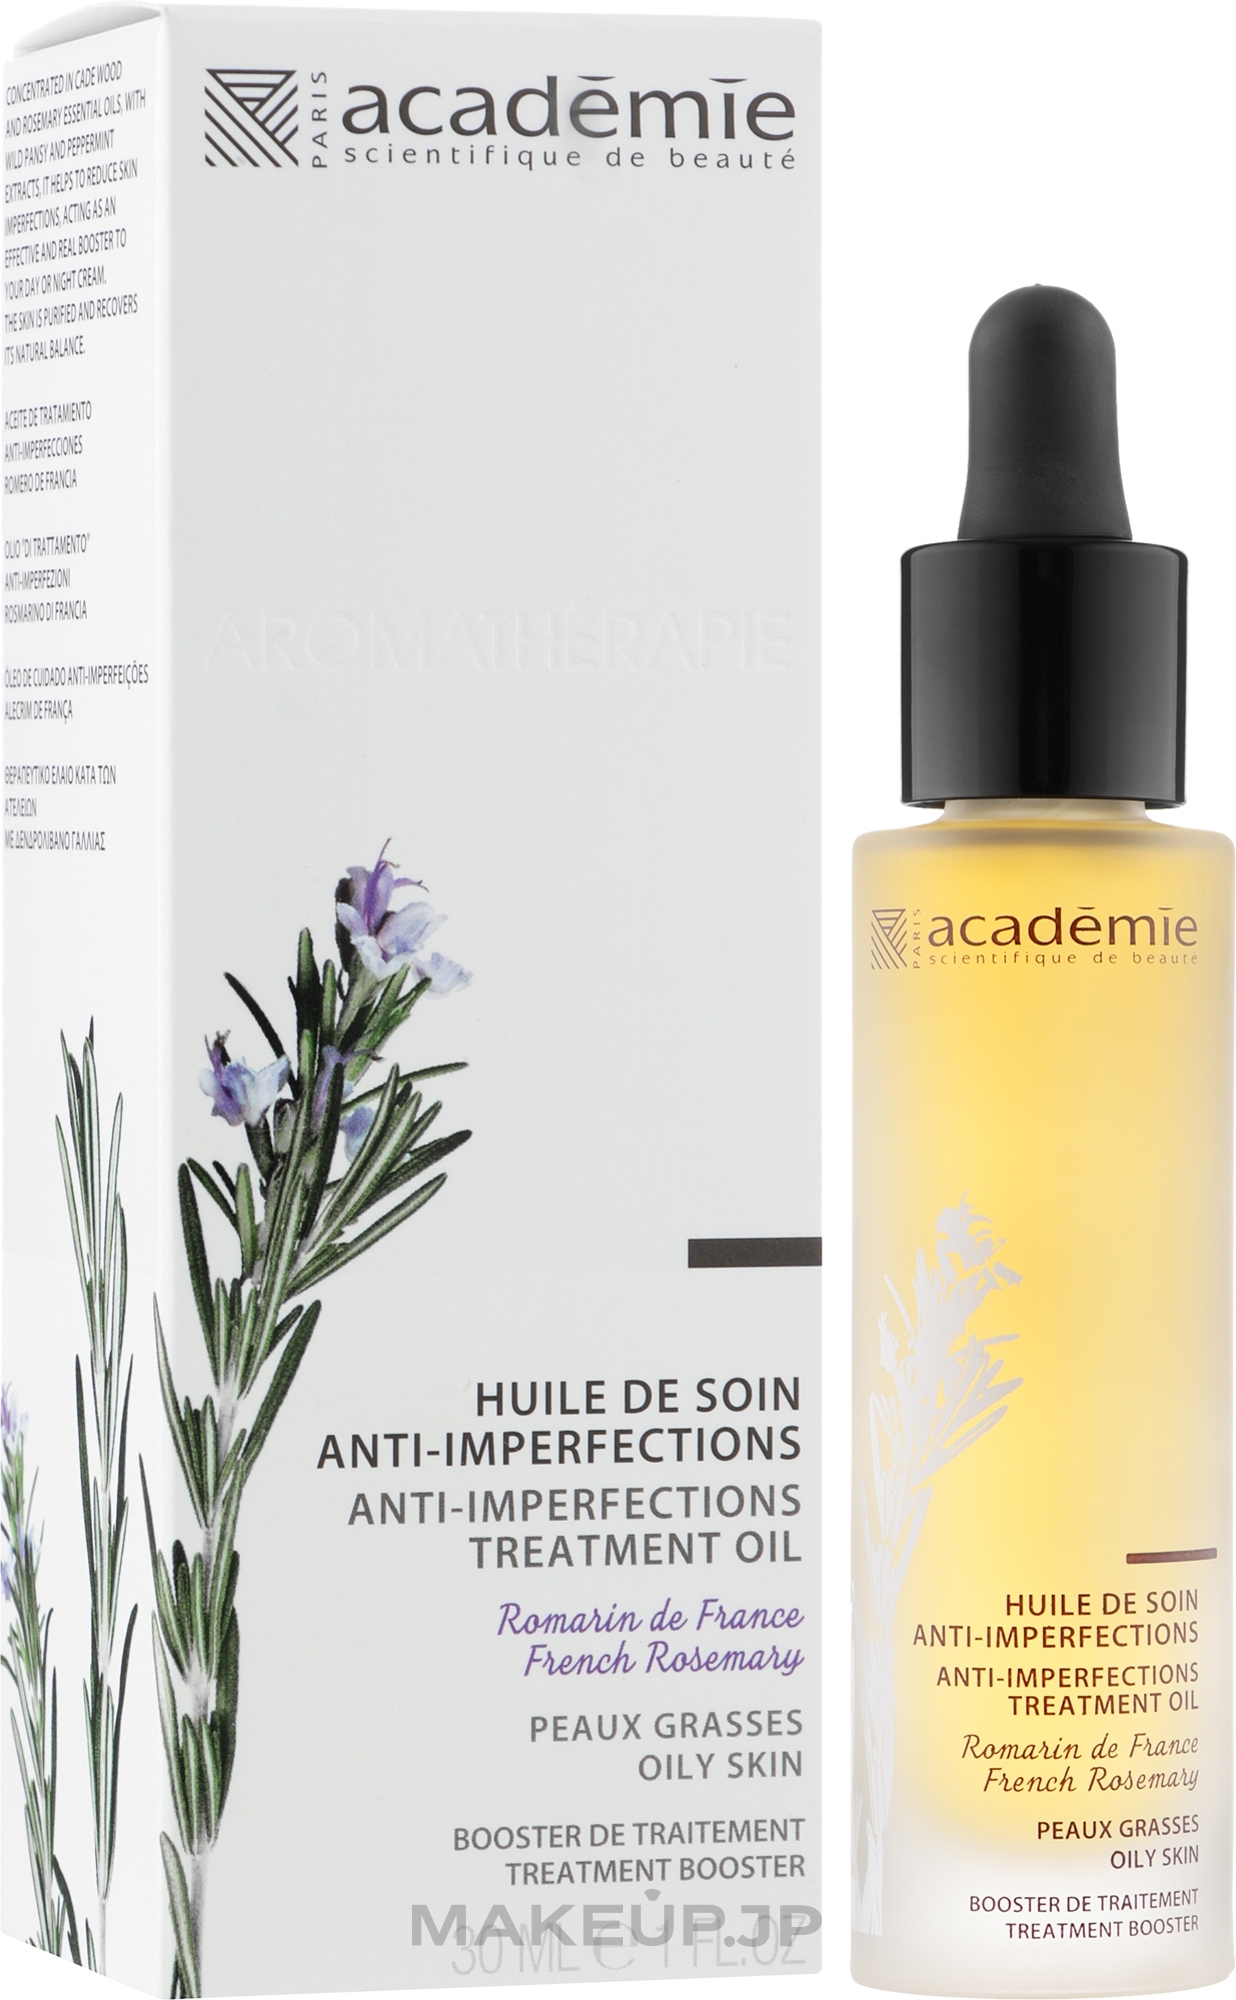 Anti-Imperfection Oil for Problem Skin "French Rosemary" - Academie Huile de soin anti-imperfections — photo 30 ml